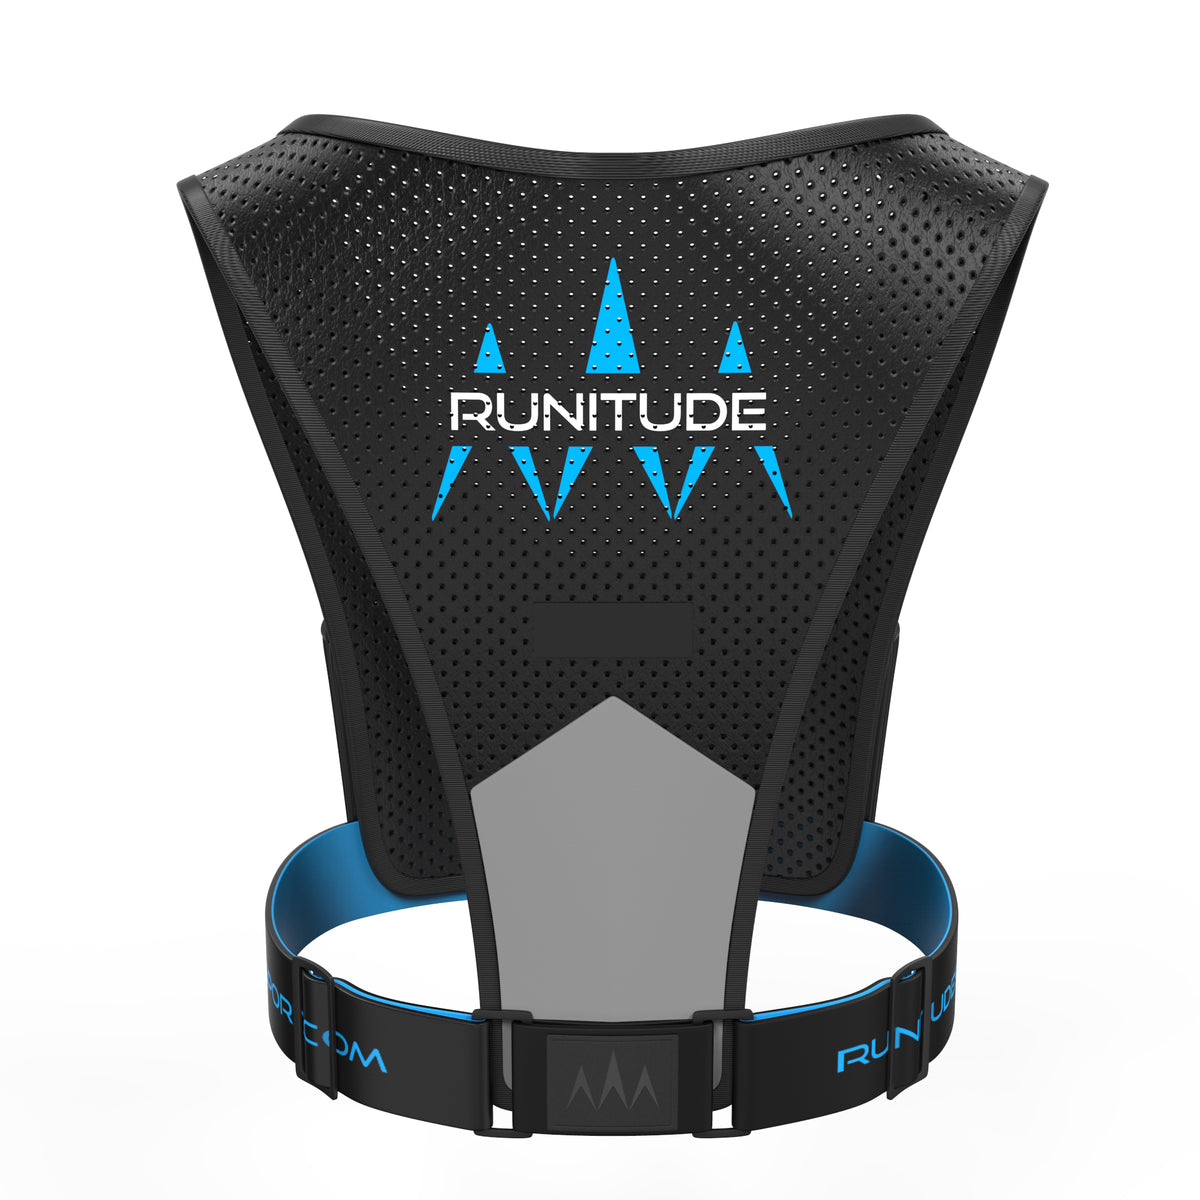 Compare prices for Runitude across all European  stores